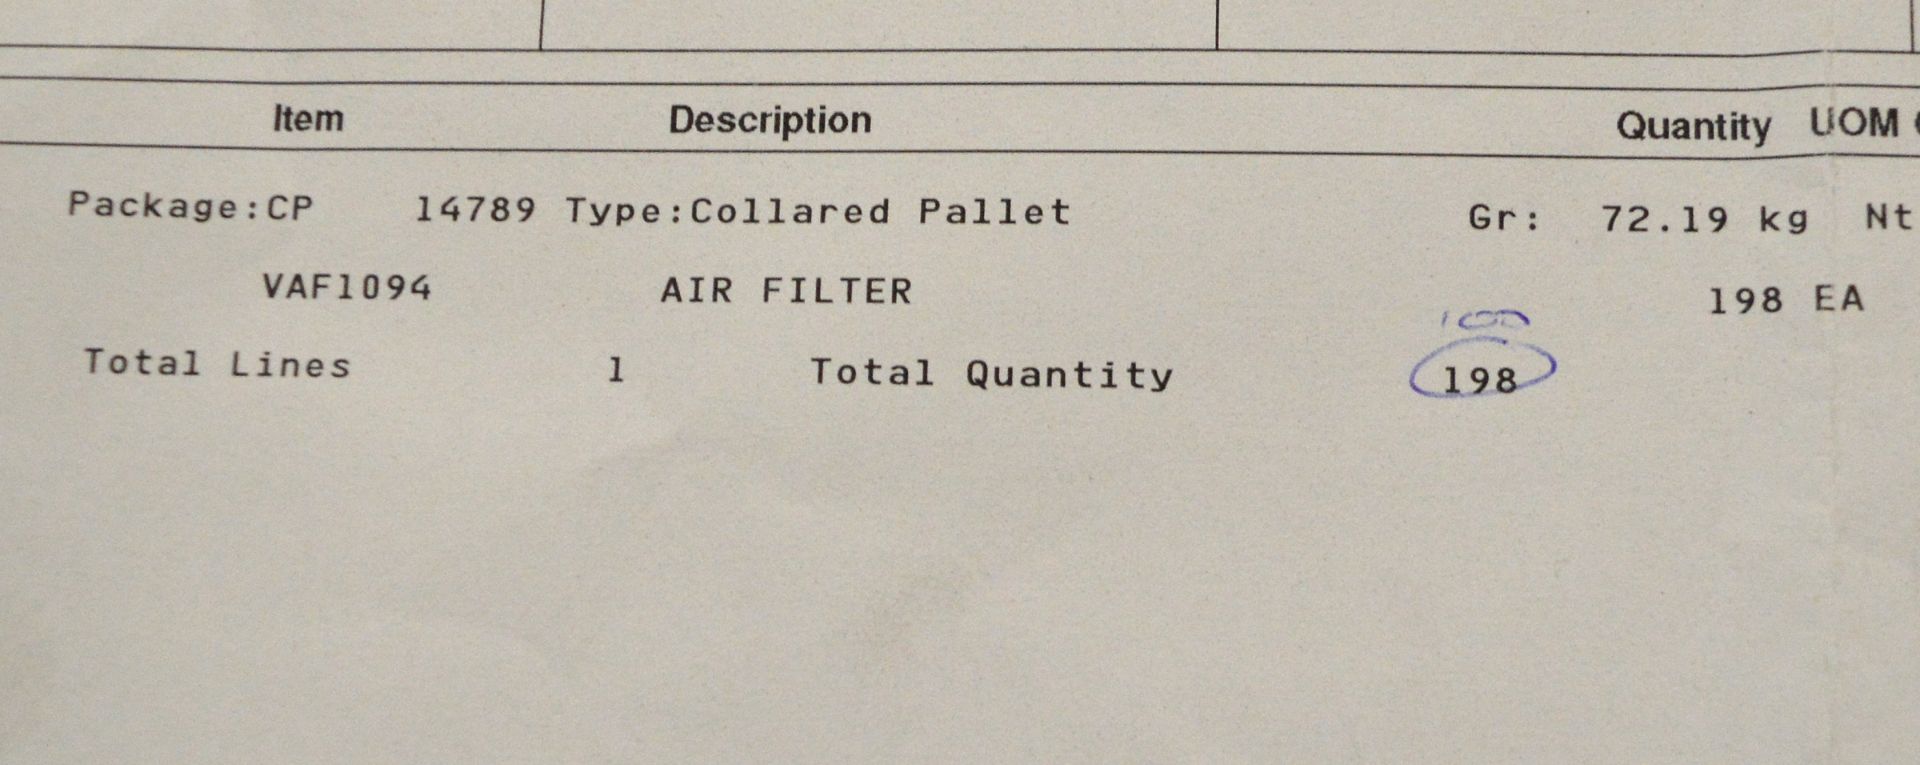 Vehicle parts - air filters - see picture for itinerary for model numbers and quantities - - Image 3 of 3